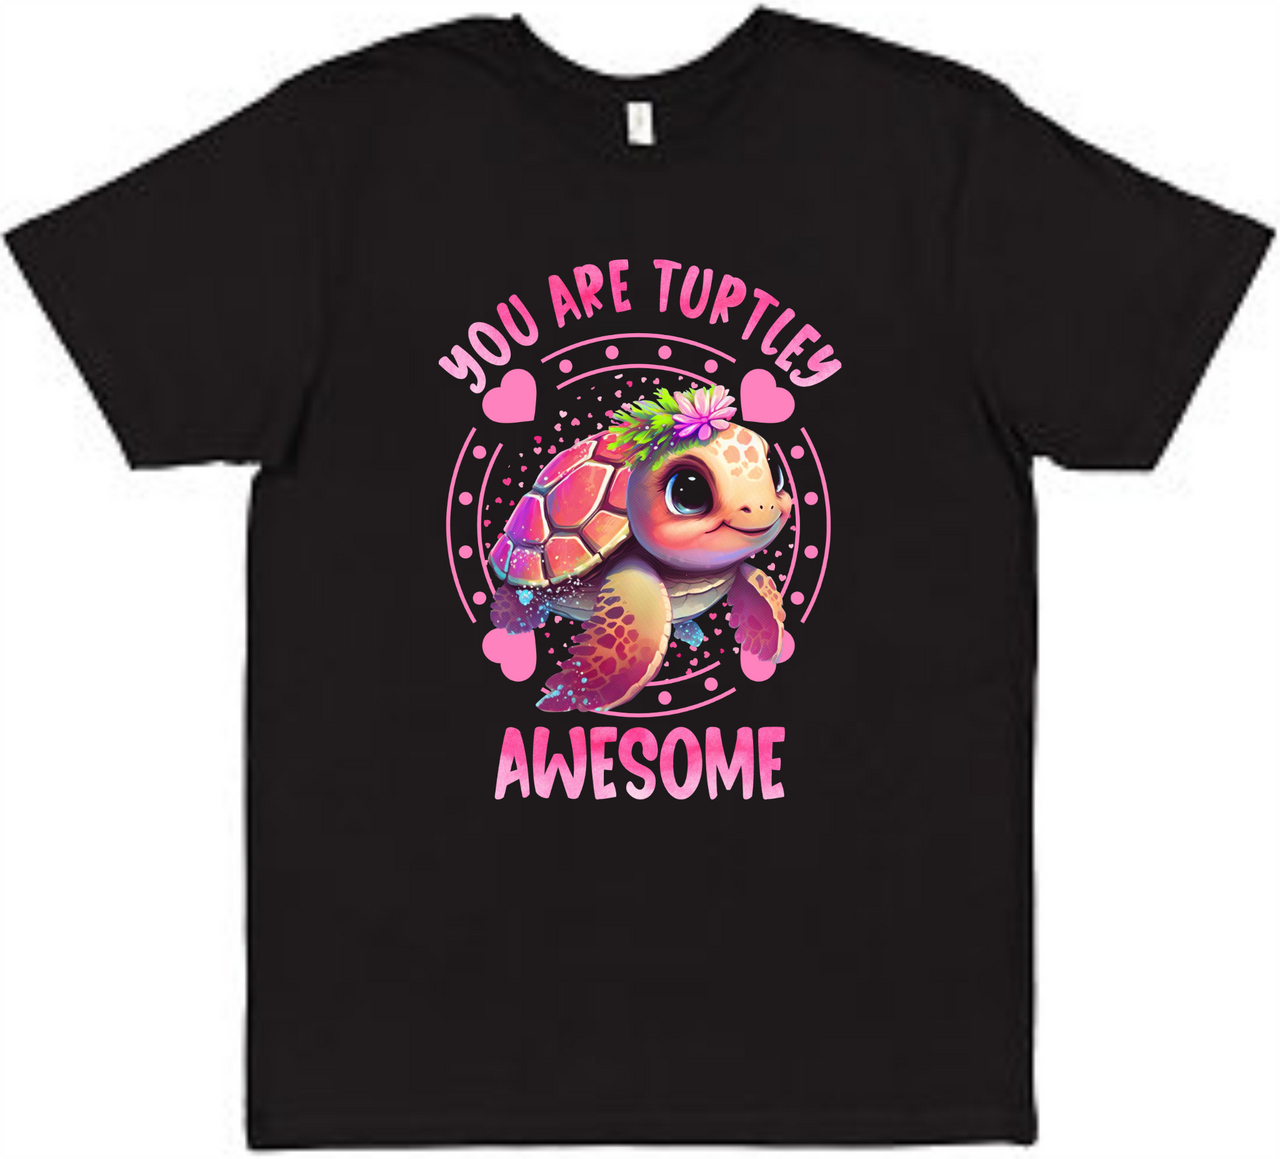 Turtlely Awesome Tee Adult Shirt by Akron Pride Custom Tees | Akron Pride Custom Tees